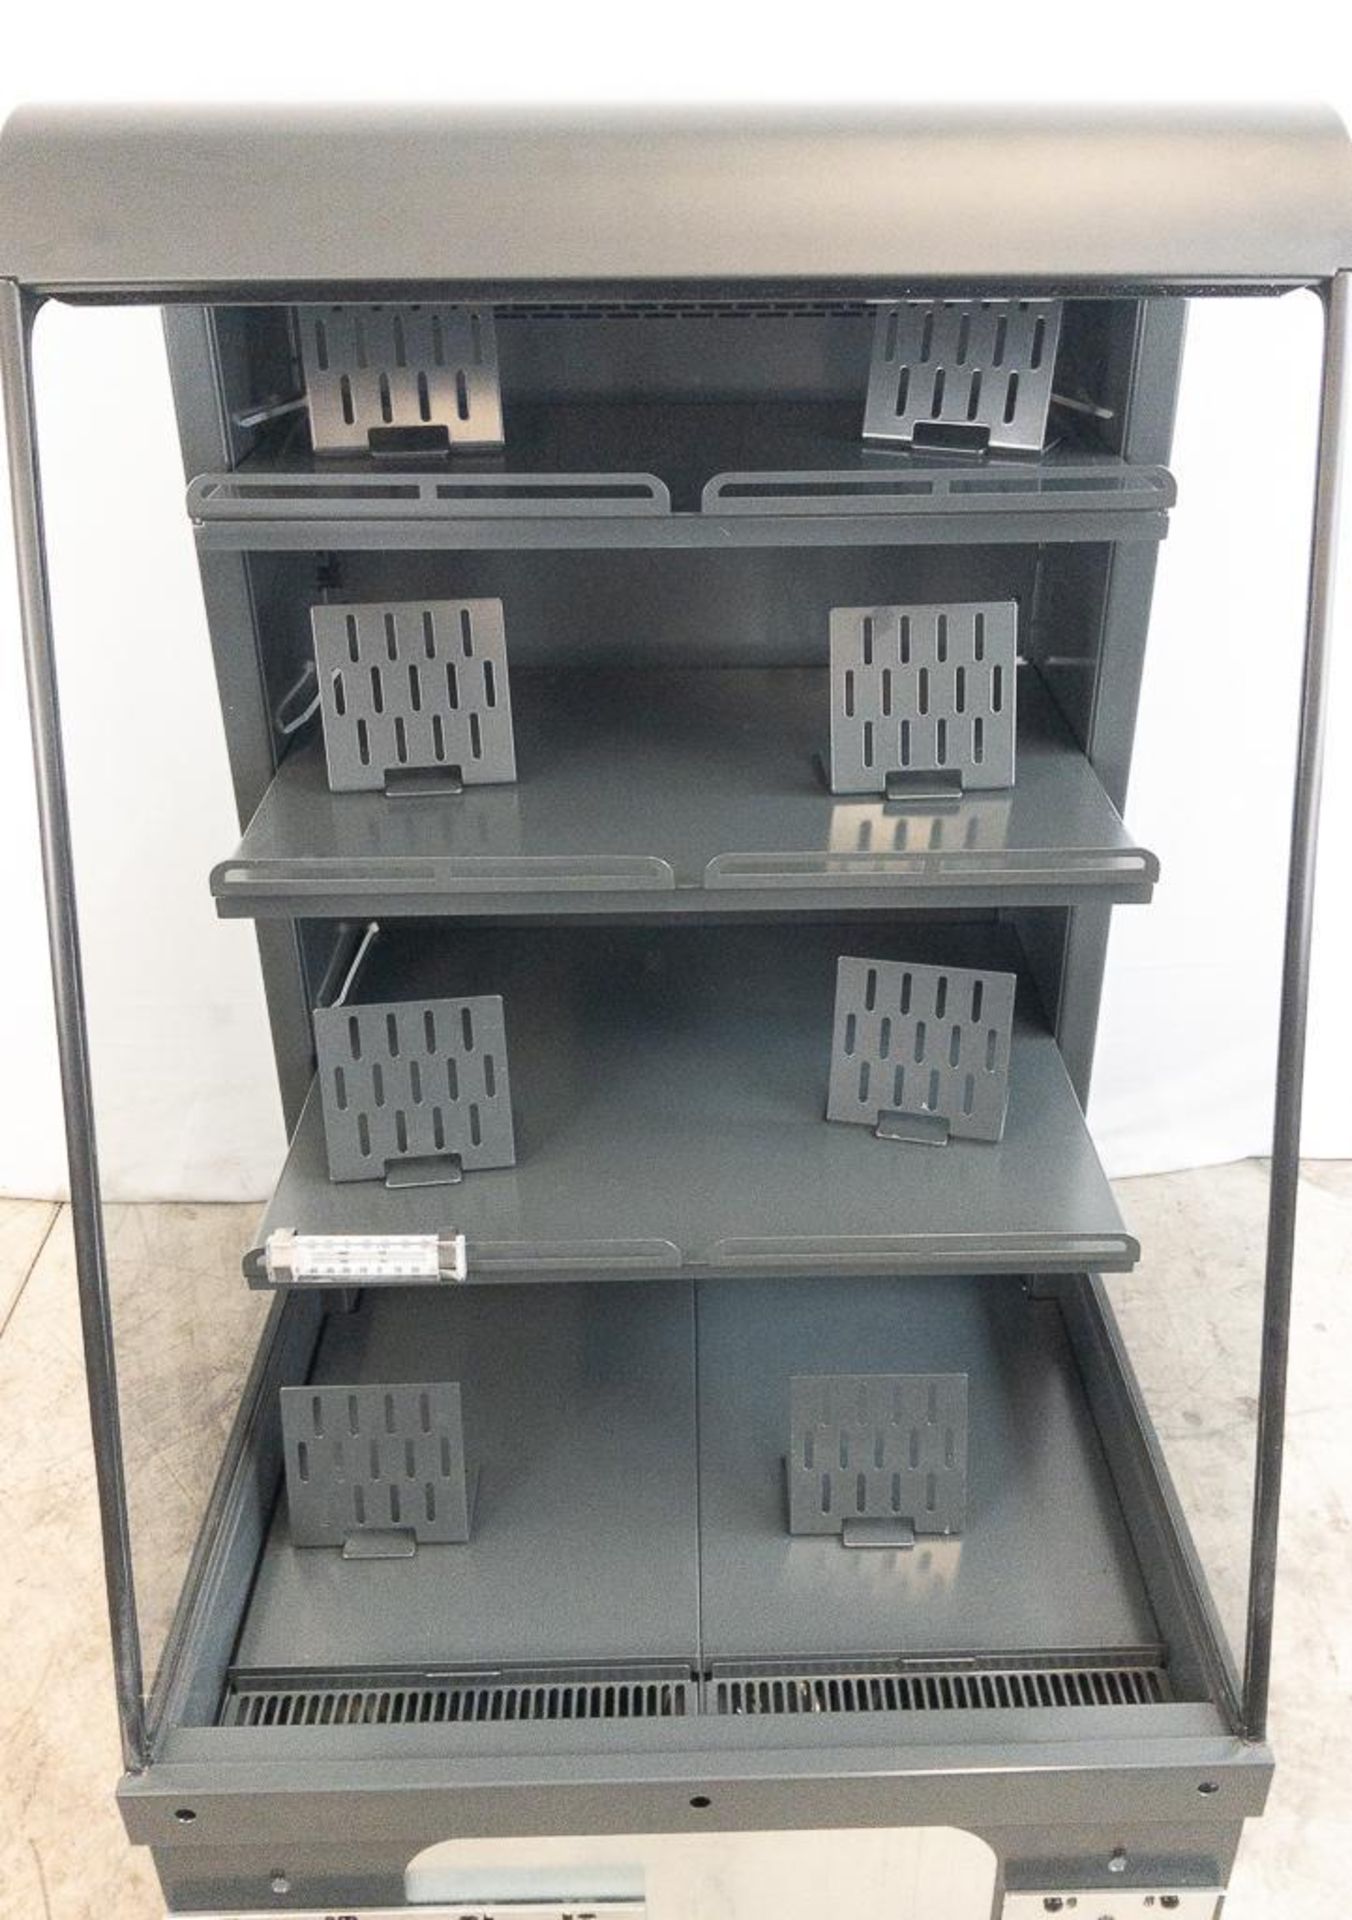 NEW STRUCTURAL CONCEPTS 27'' REFRIGERATED OPEN MERCHANDISER - MODEL SBO2755R - Image 5 of 22